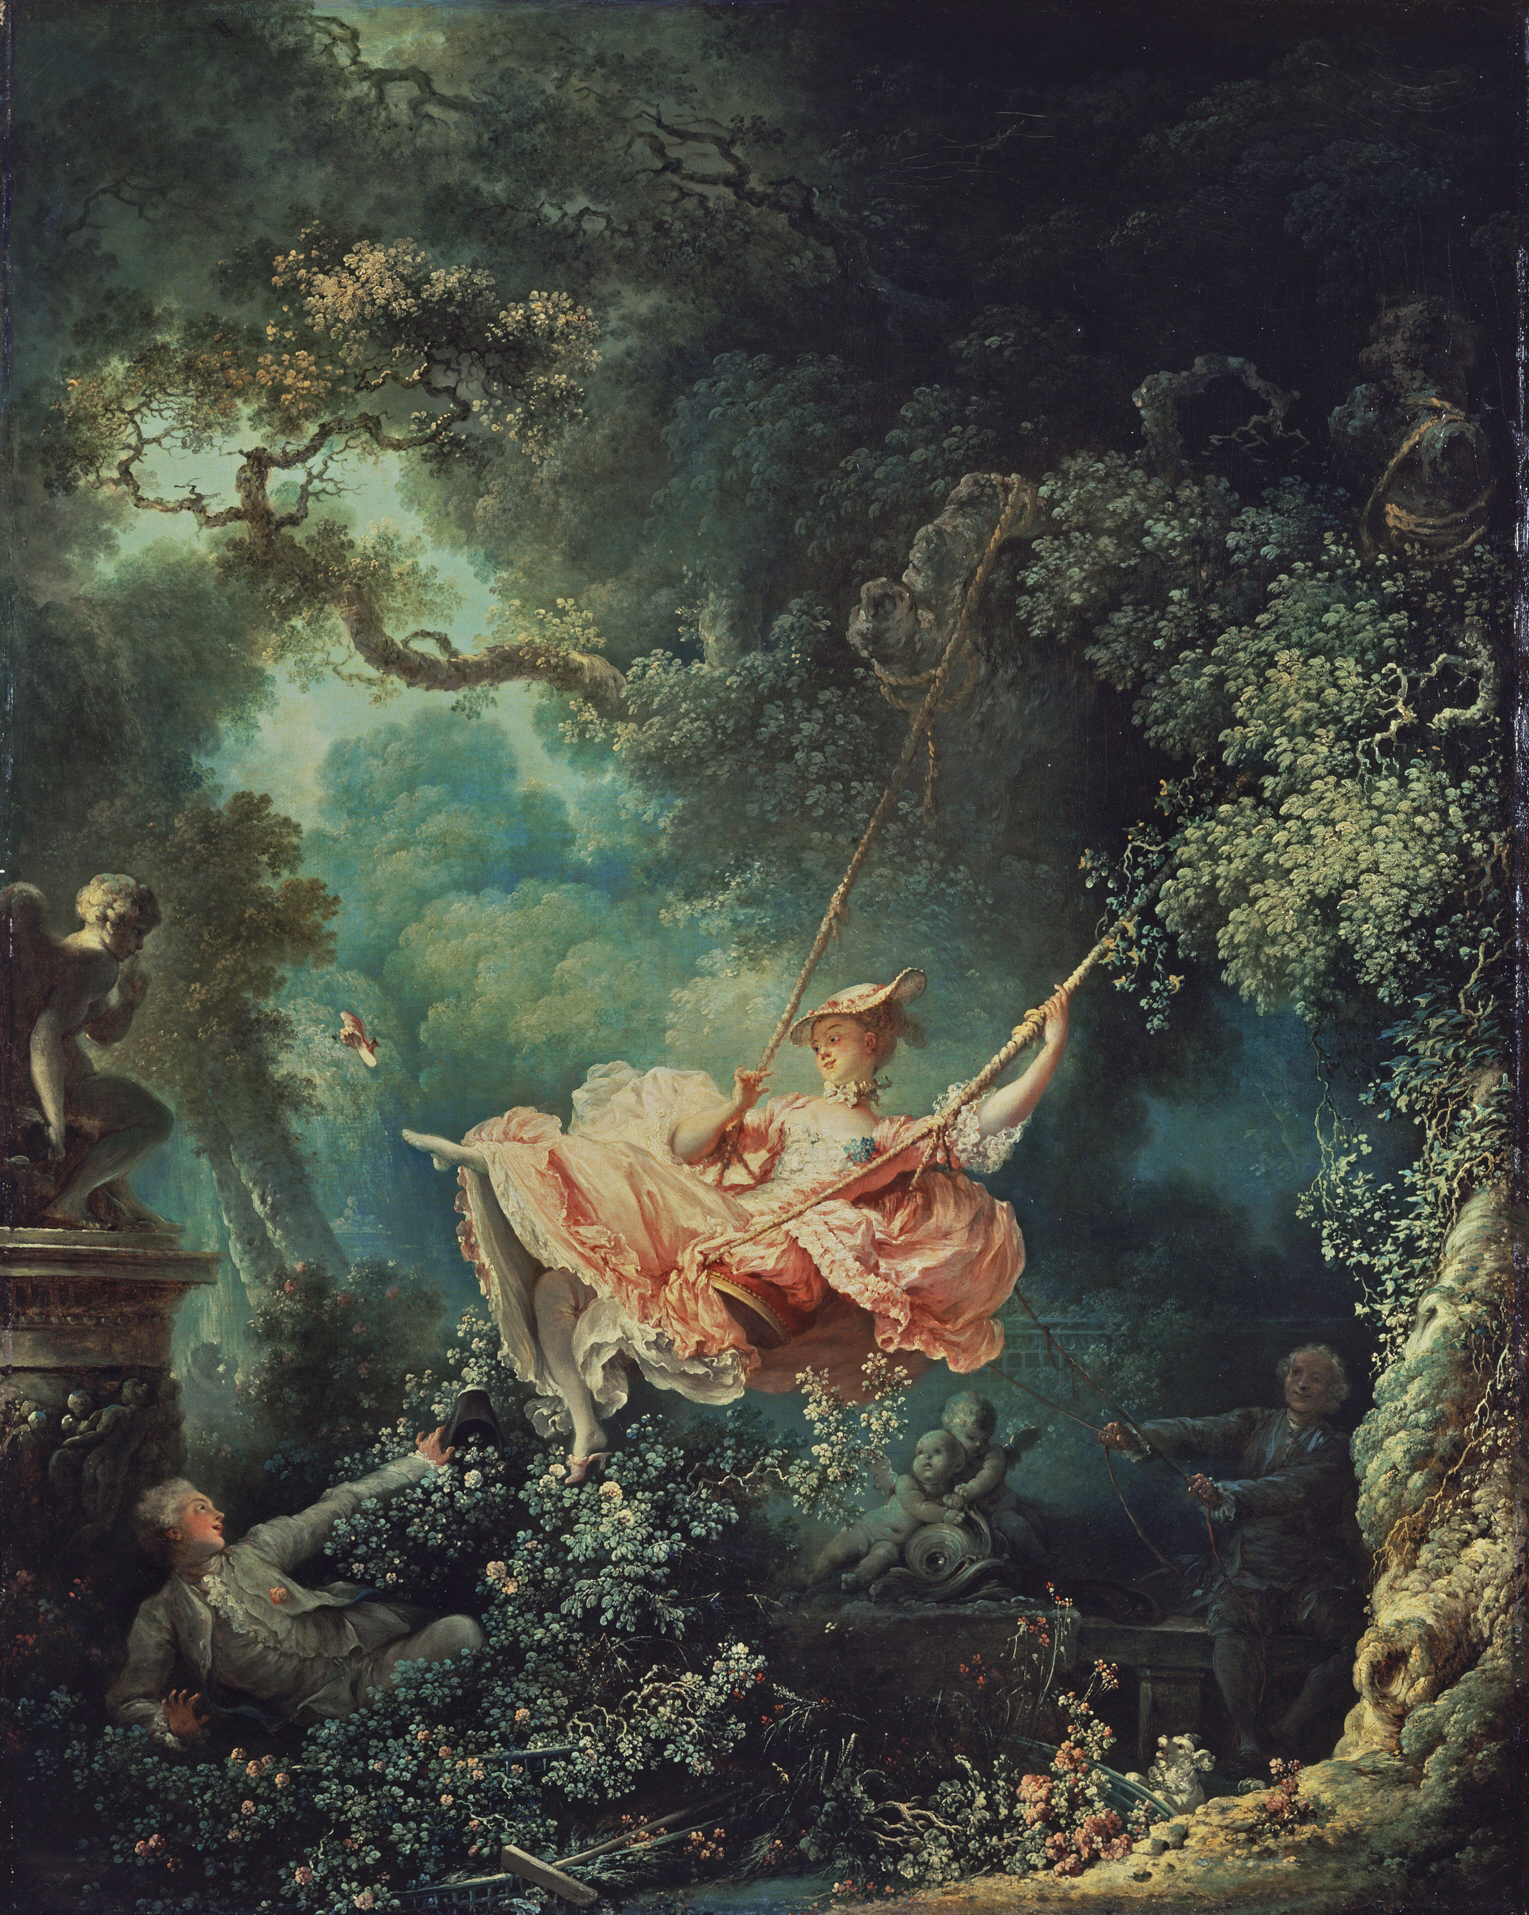 The Happy Accidents of the Swing by Jean-Honoré Fragonard - 1767-1768 - 81 × 64 cm Wallace Collection